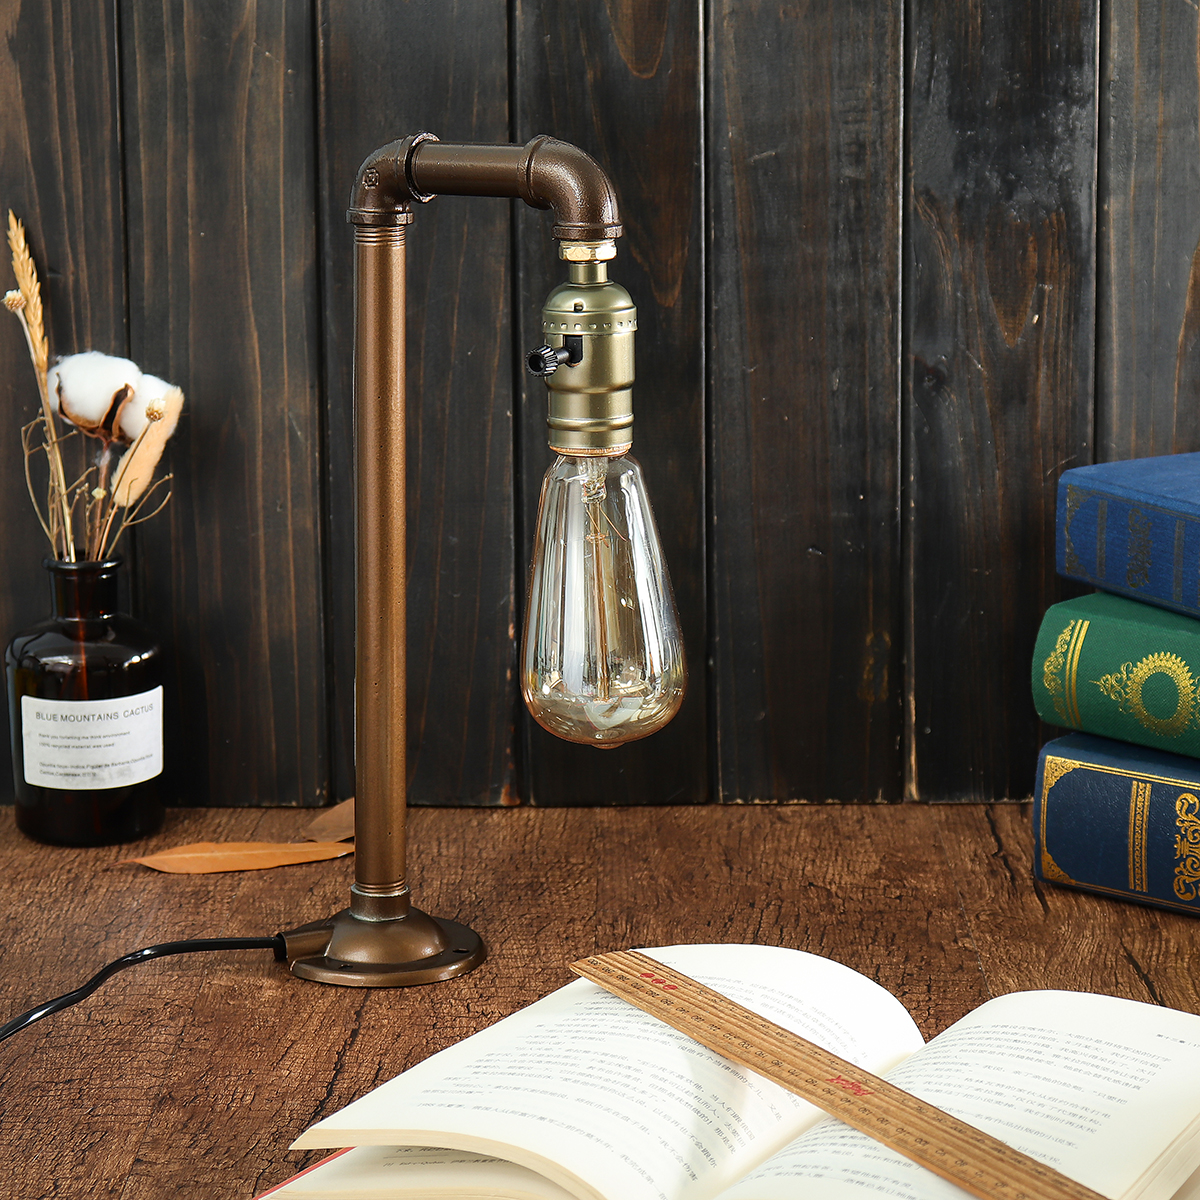 Industrial-Water-Pipe-E27-Bulb-Lamp-Light-Desk-Table-Lamp-Home-Bedroom-Fixture-Decor-1432211-1